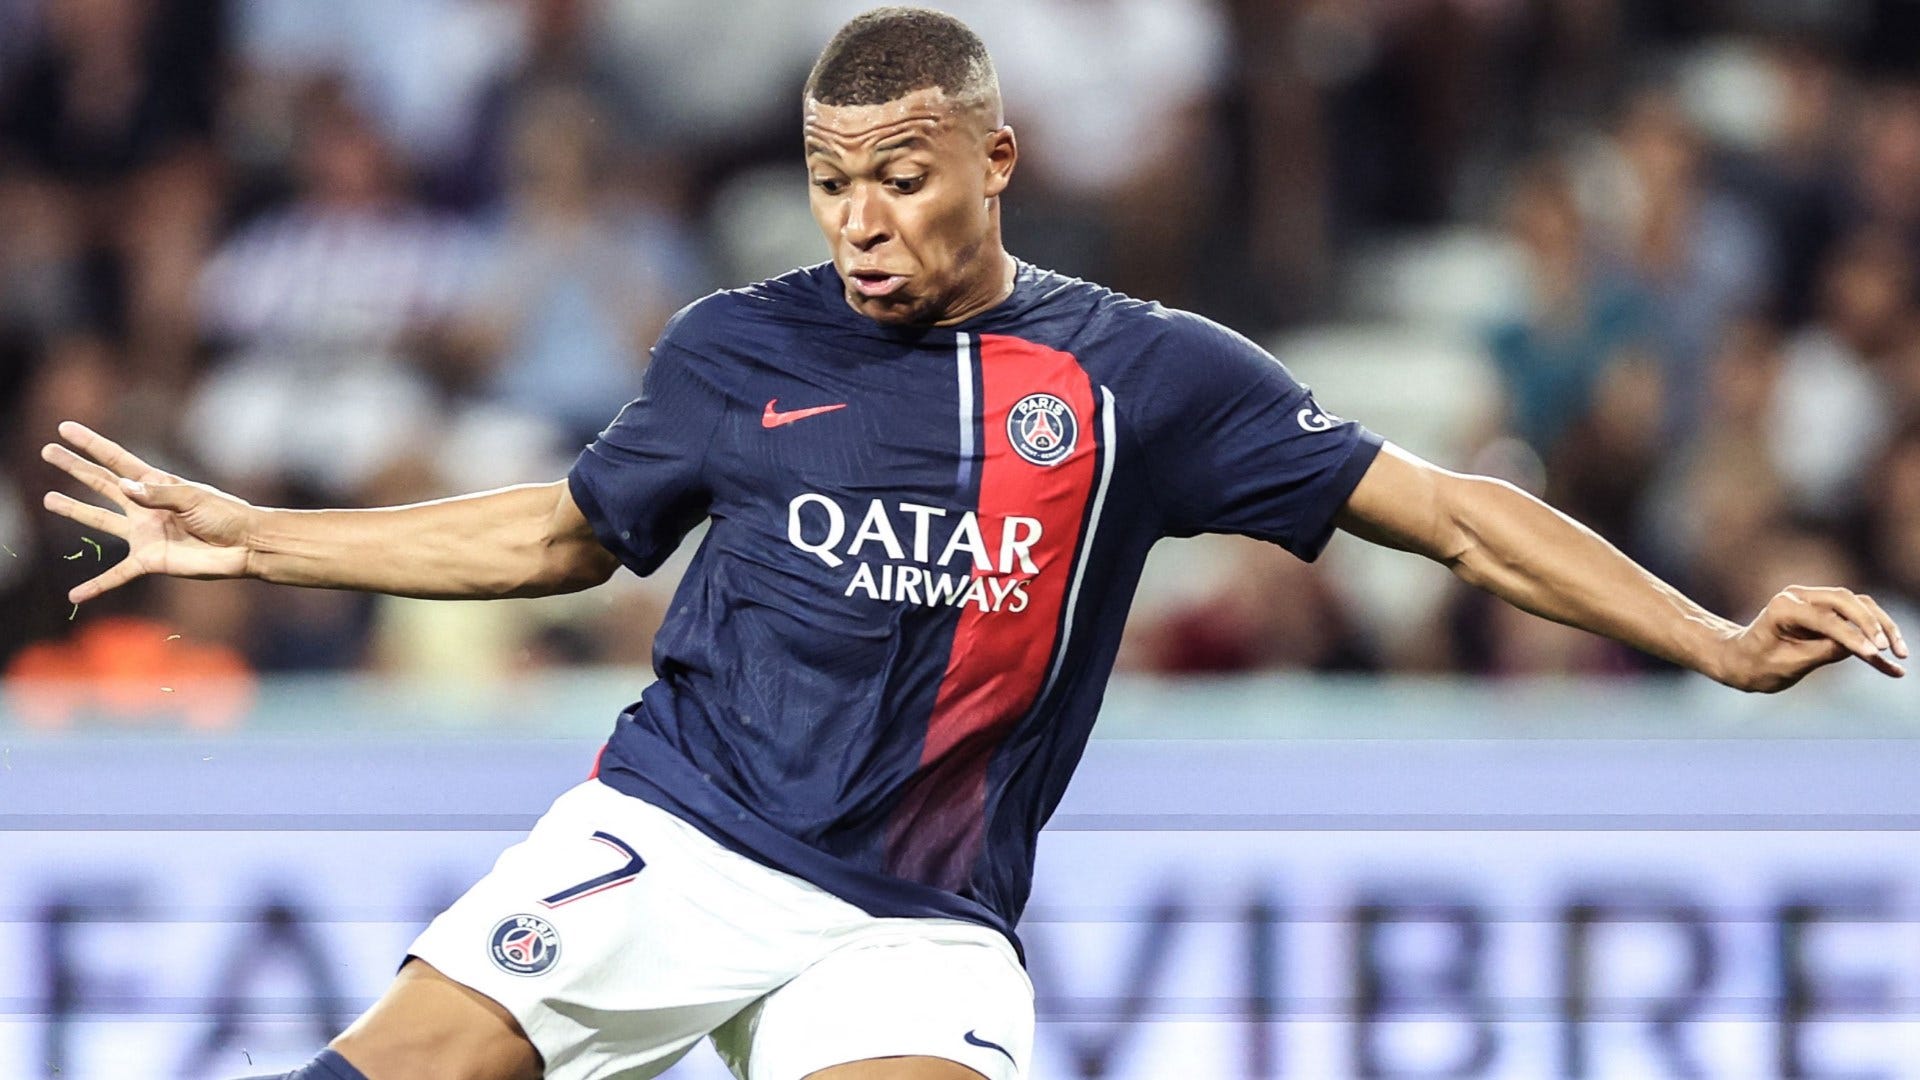 Brest vs PSG: Where to watch the match online, live stream, TV channels, and kick-off time